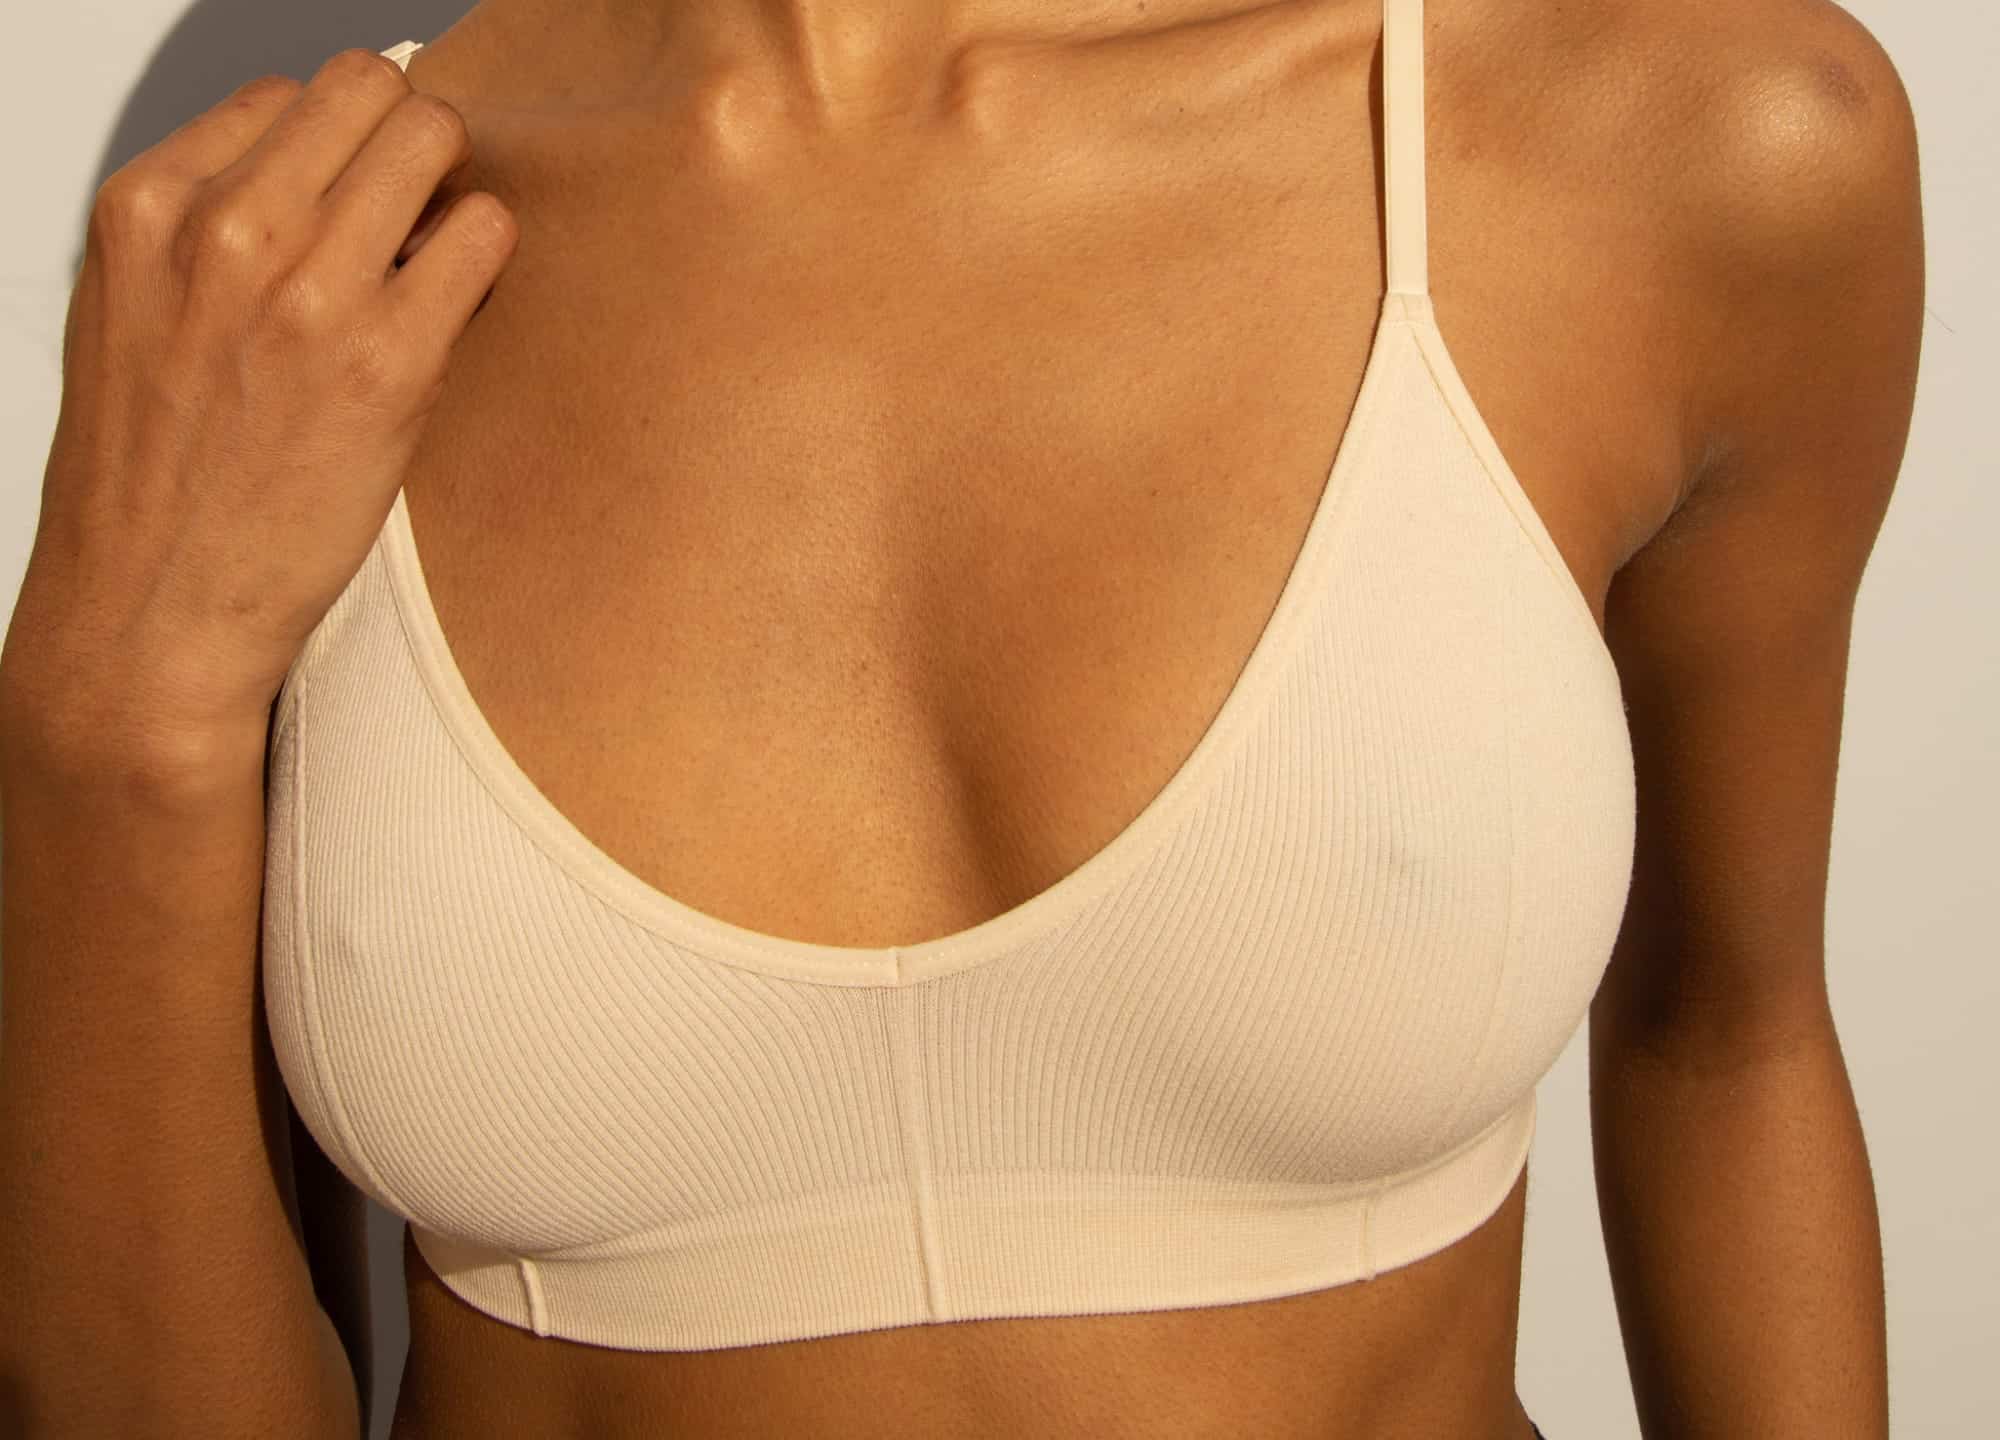 4 Ways to Get Natural-Looking Breast Implants